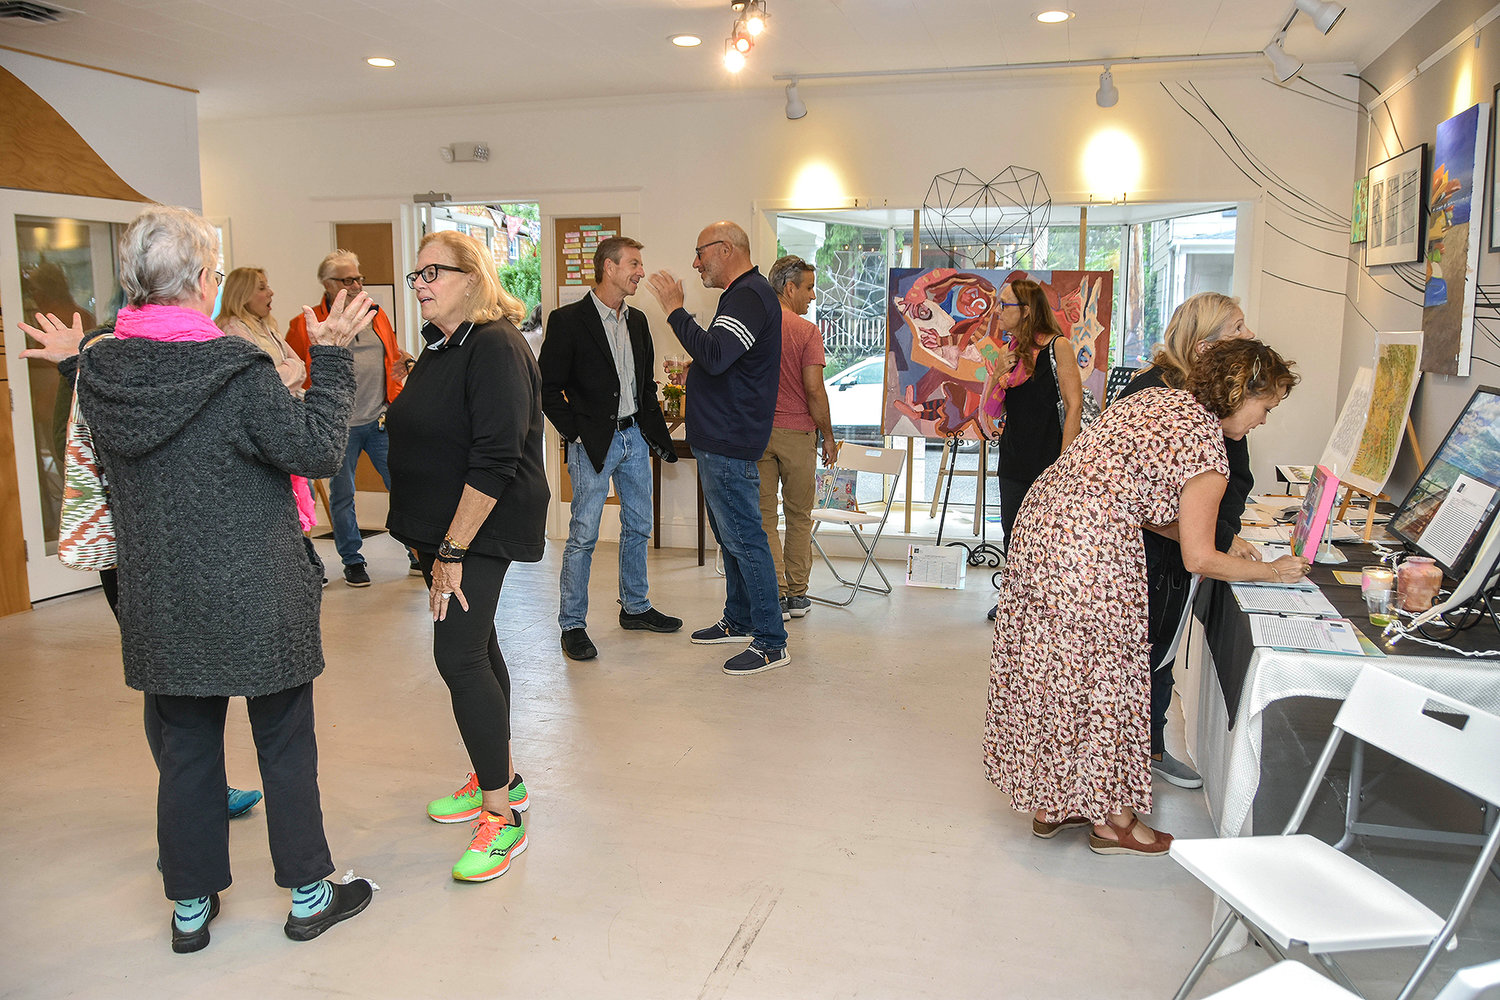 A variety of art was on view at the ribbon-cutting for the new Sea Cliff Council for the Arts building.